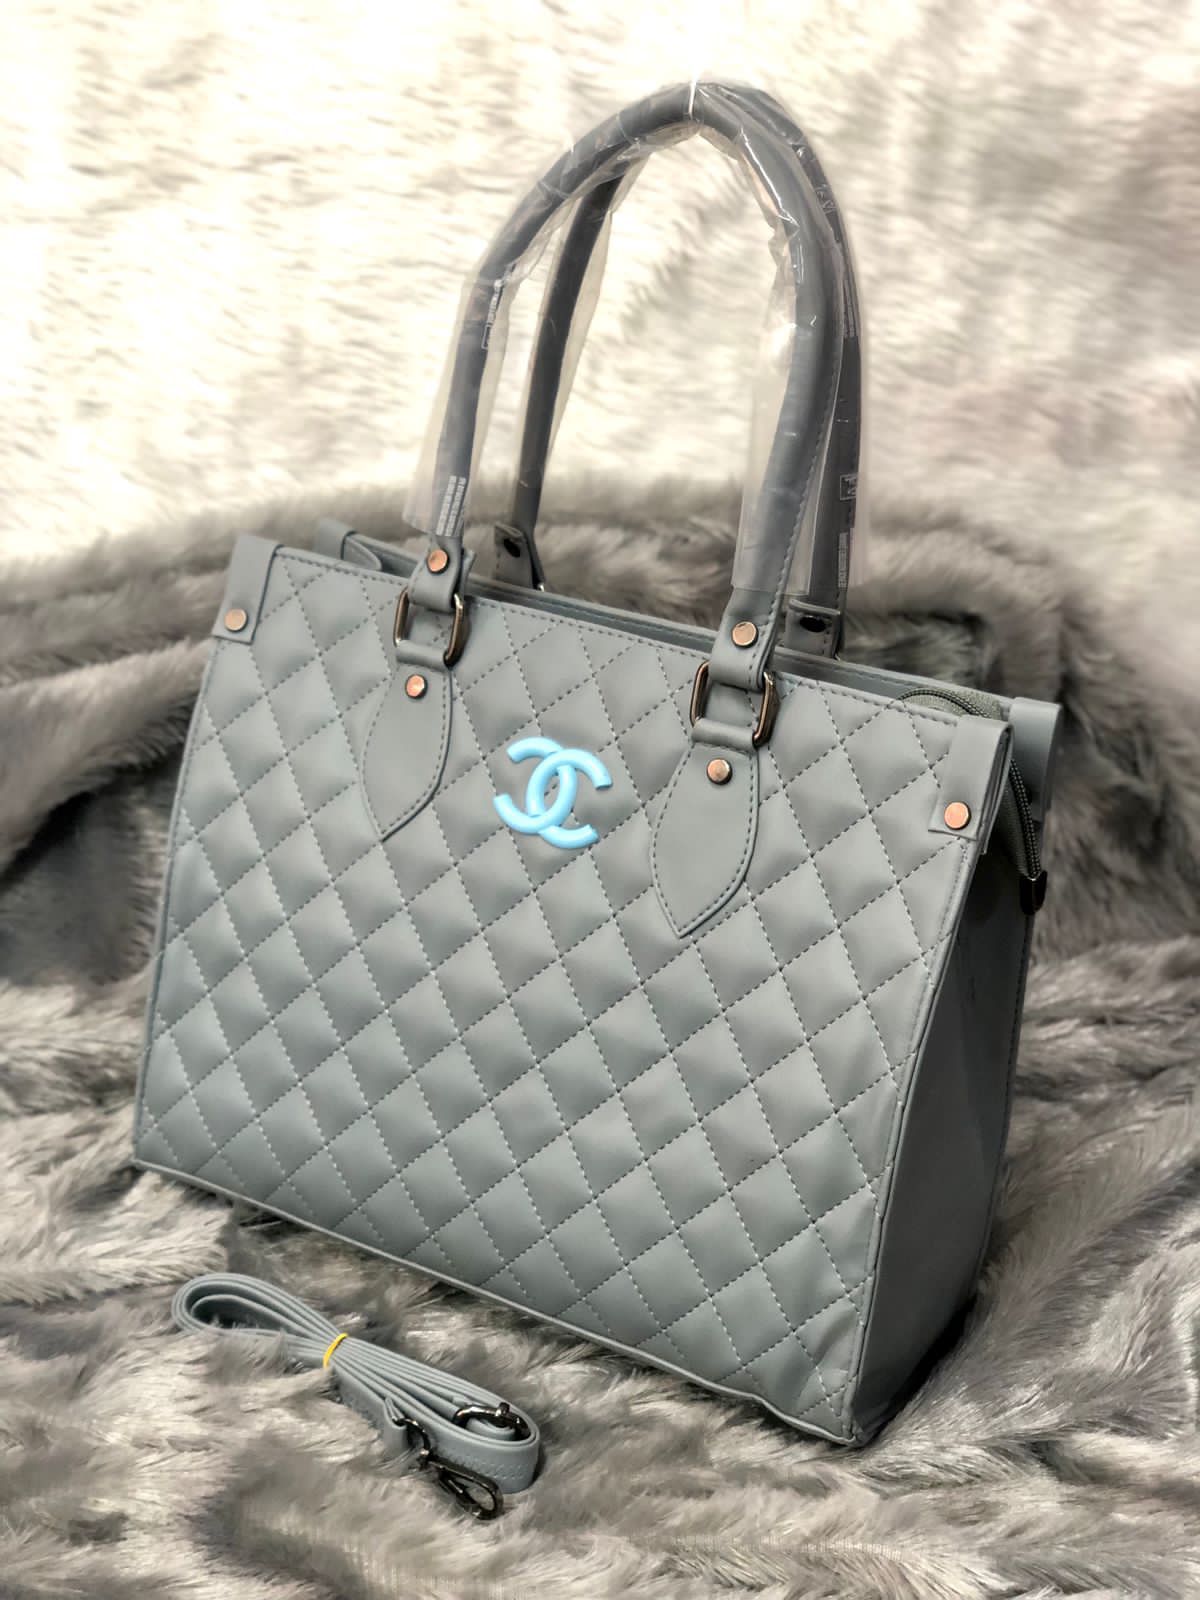 CHANEL Pre-Owned Timeless Jumbo Classic Flap Shoulder Bag - Farfetch